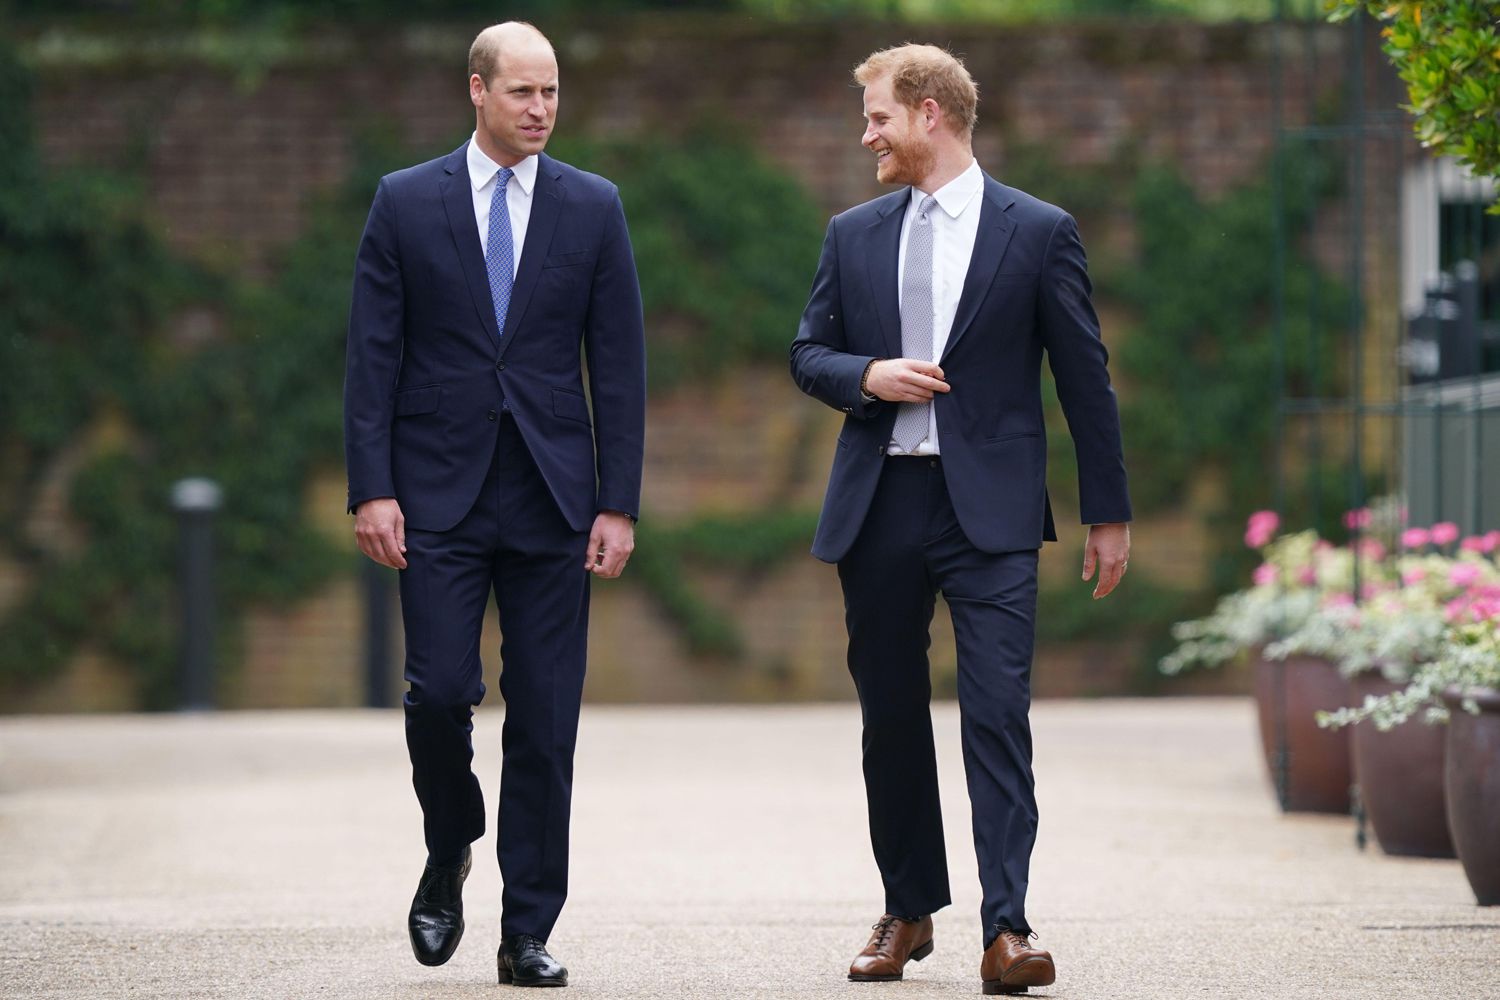 The Duke of Cambridge and Duke of Sussex arrive for the unveiling of a statue they commissioned of their mother Diana, Princess of Wales